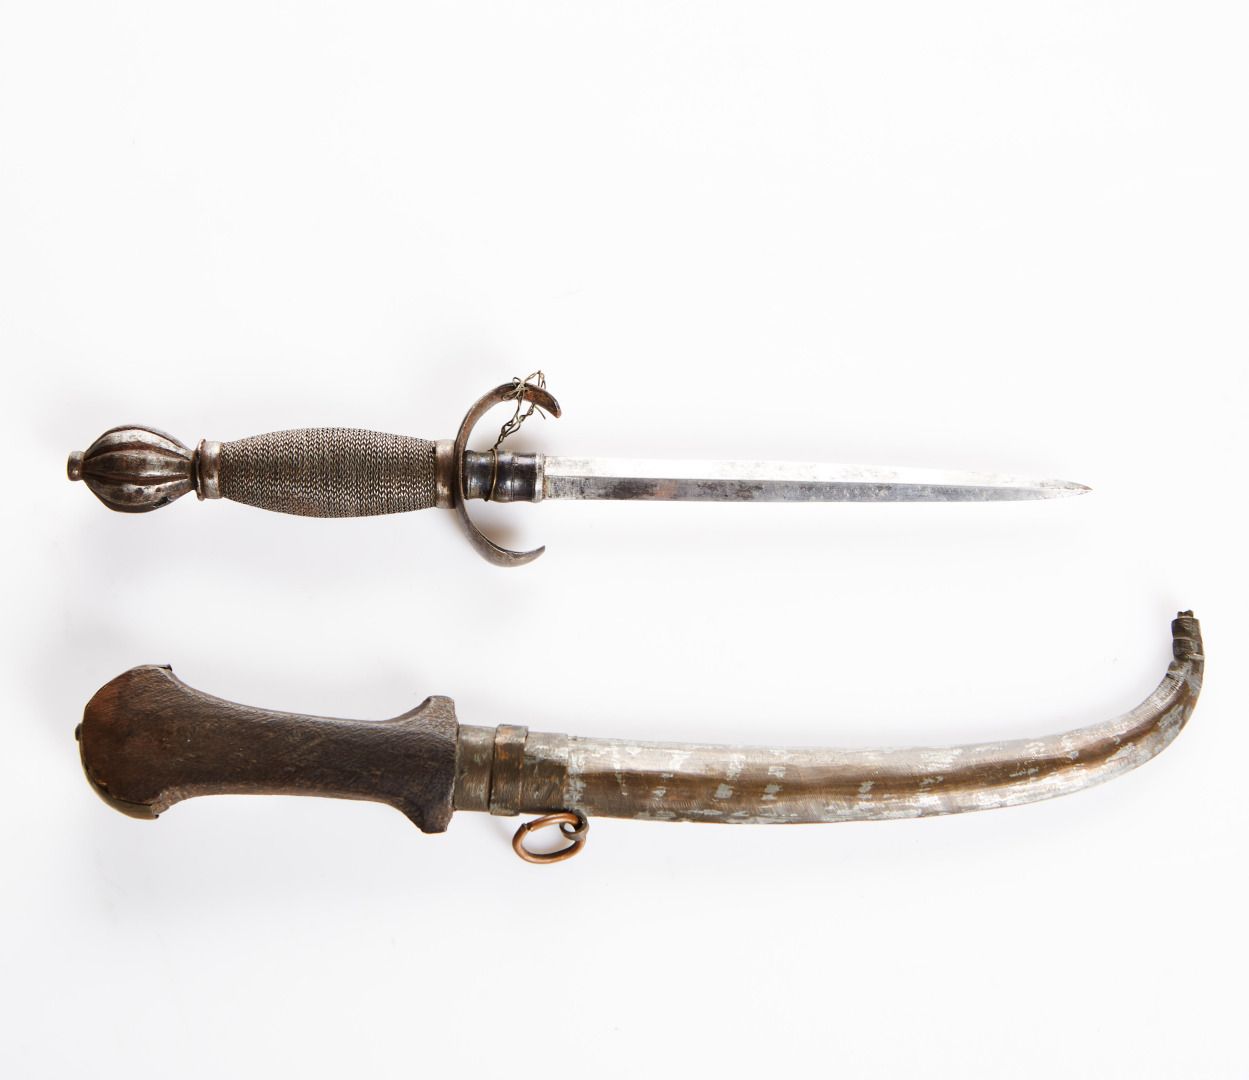 Null Set:
-A 17th century style dagger. Composite construction.
-A North African&hellip;